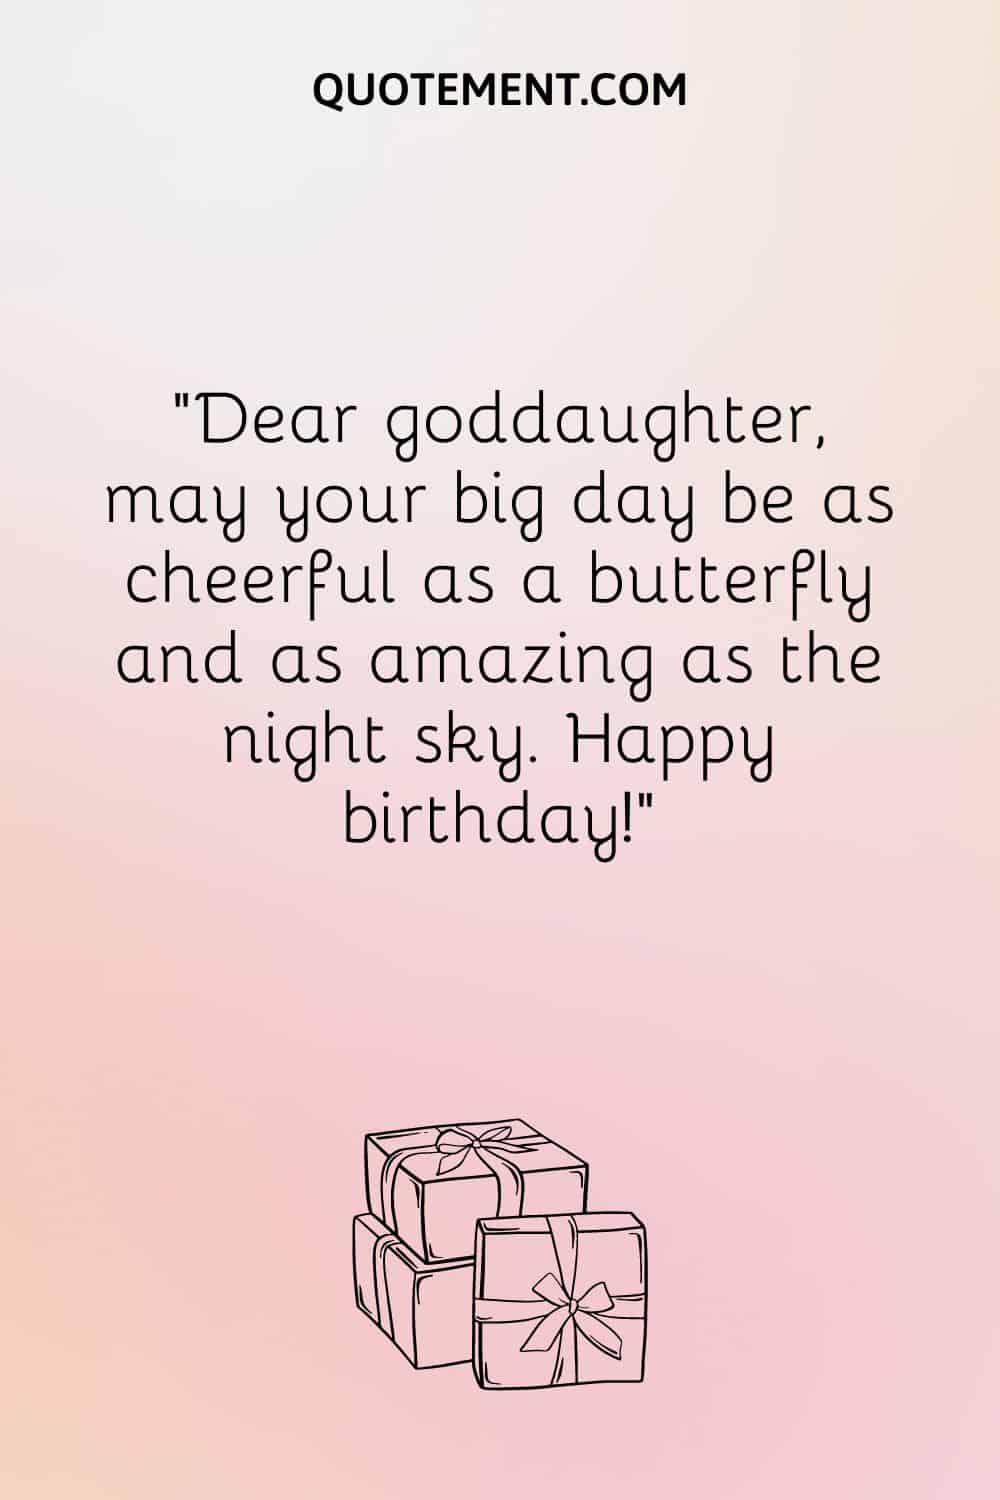 “Dear goddaughter, may your big day be as cheerful as a butterfly and as amazing as the night sky. Happy birthday!”